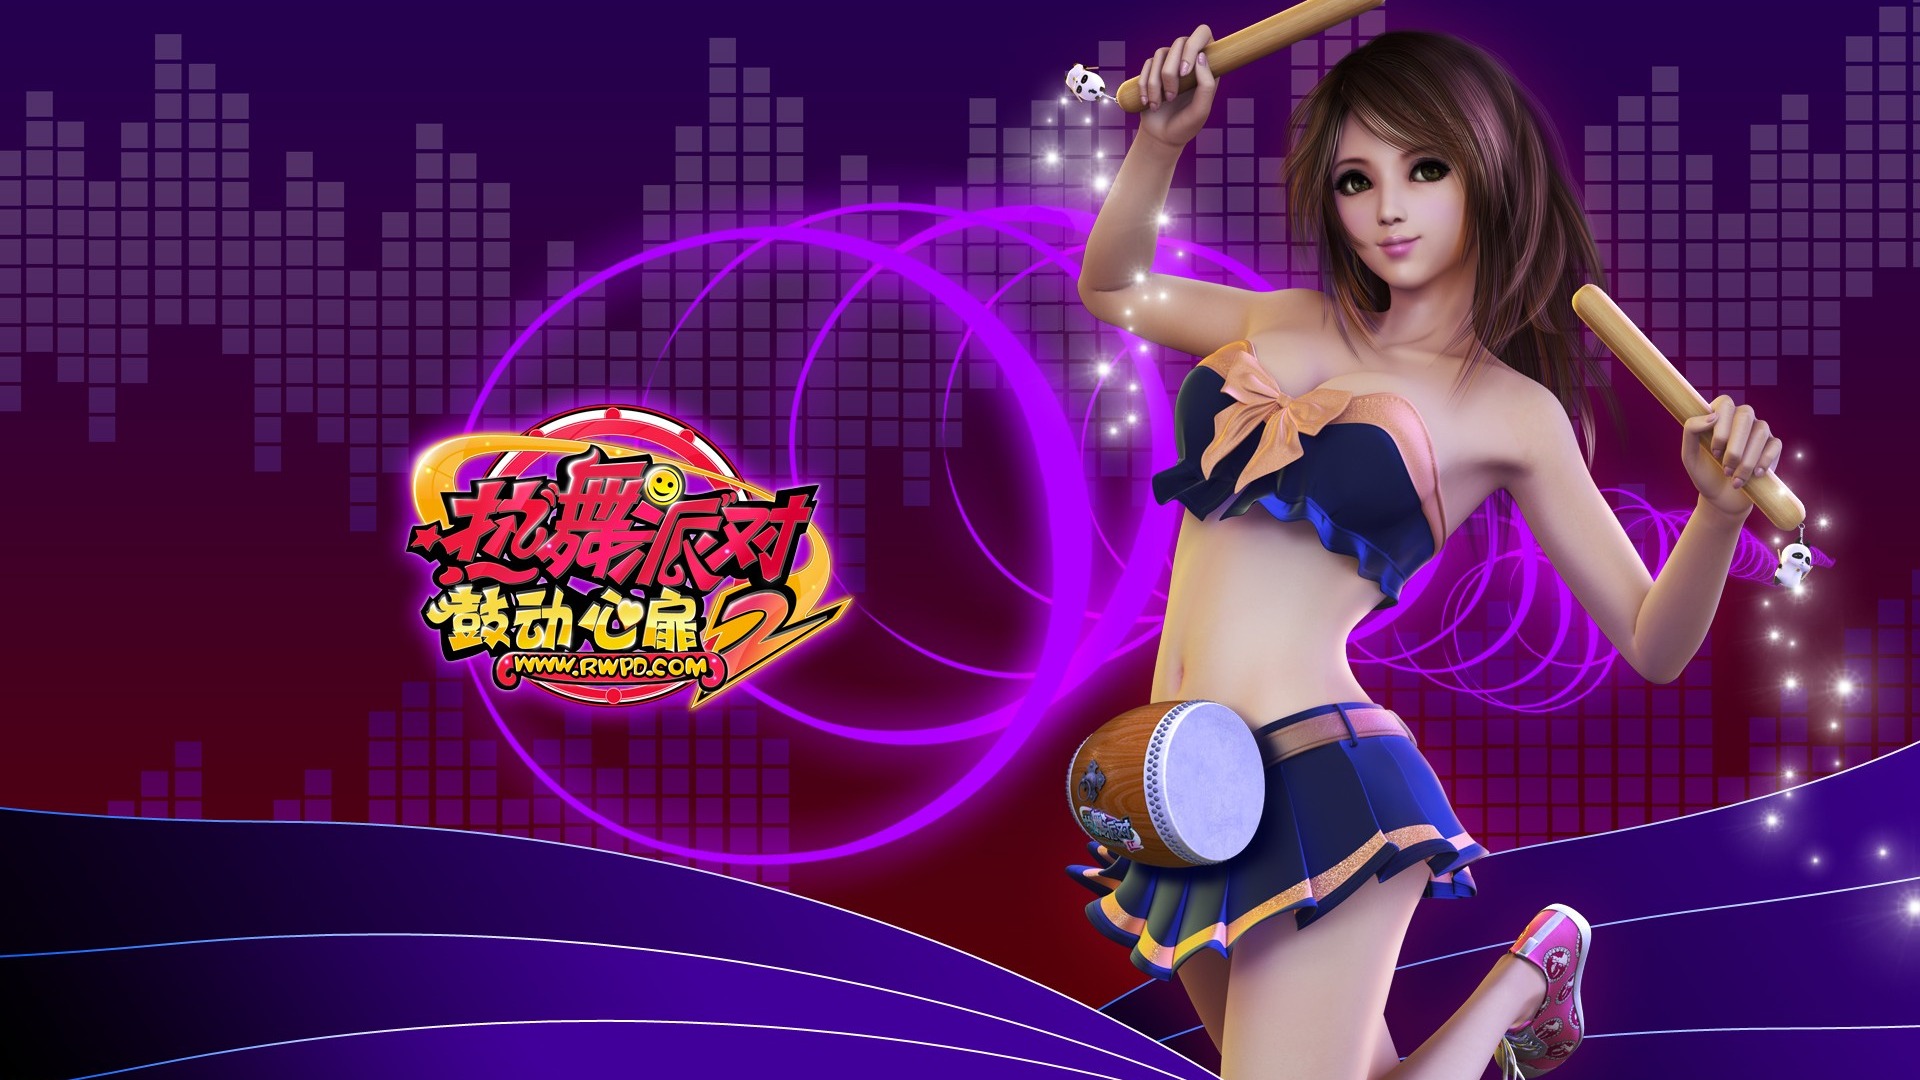 Online game Hot Dance Party II official wallpapers #17 - 1920x1080